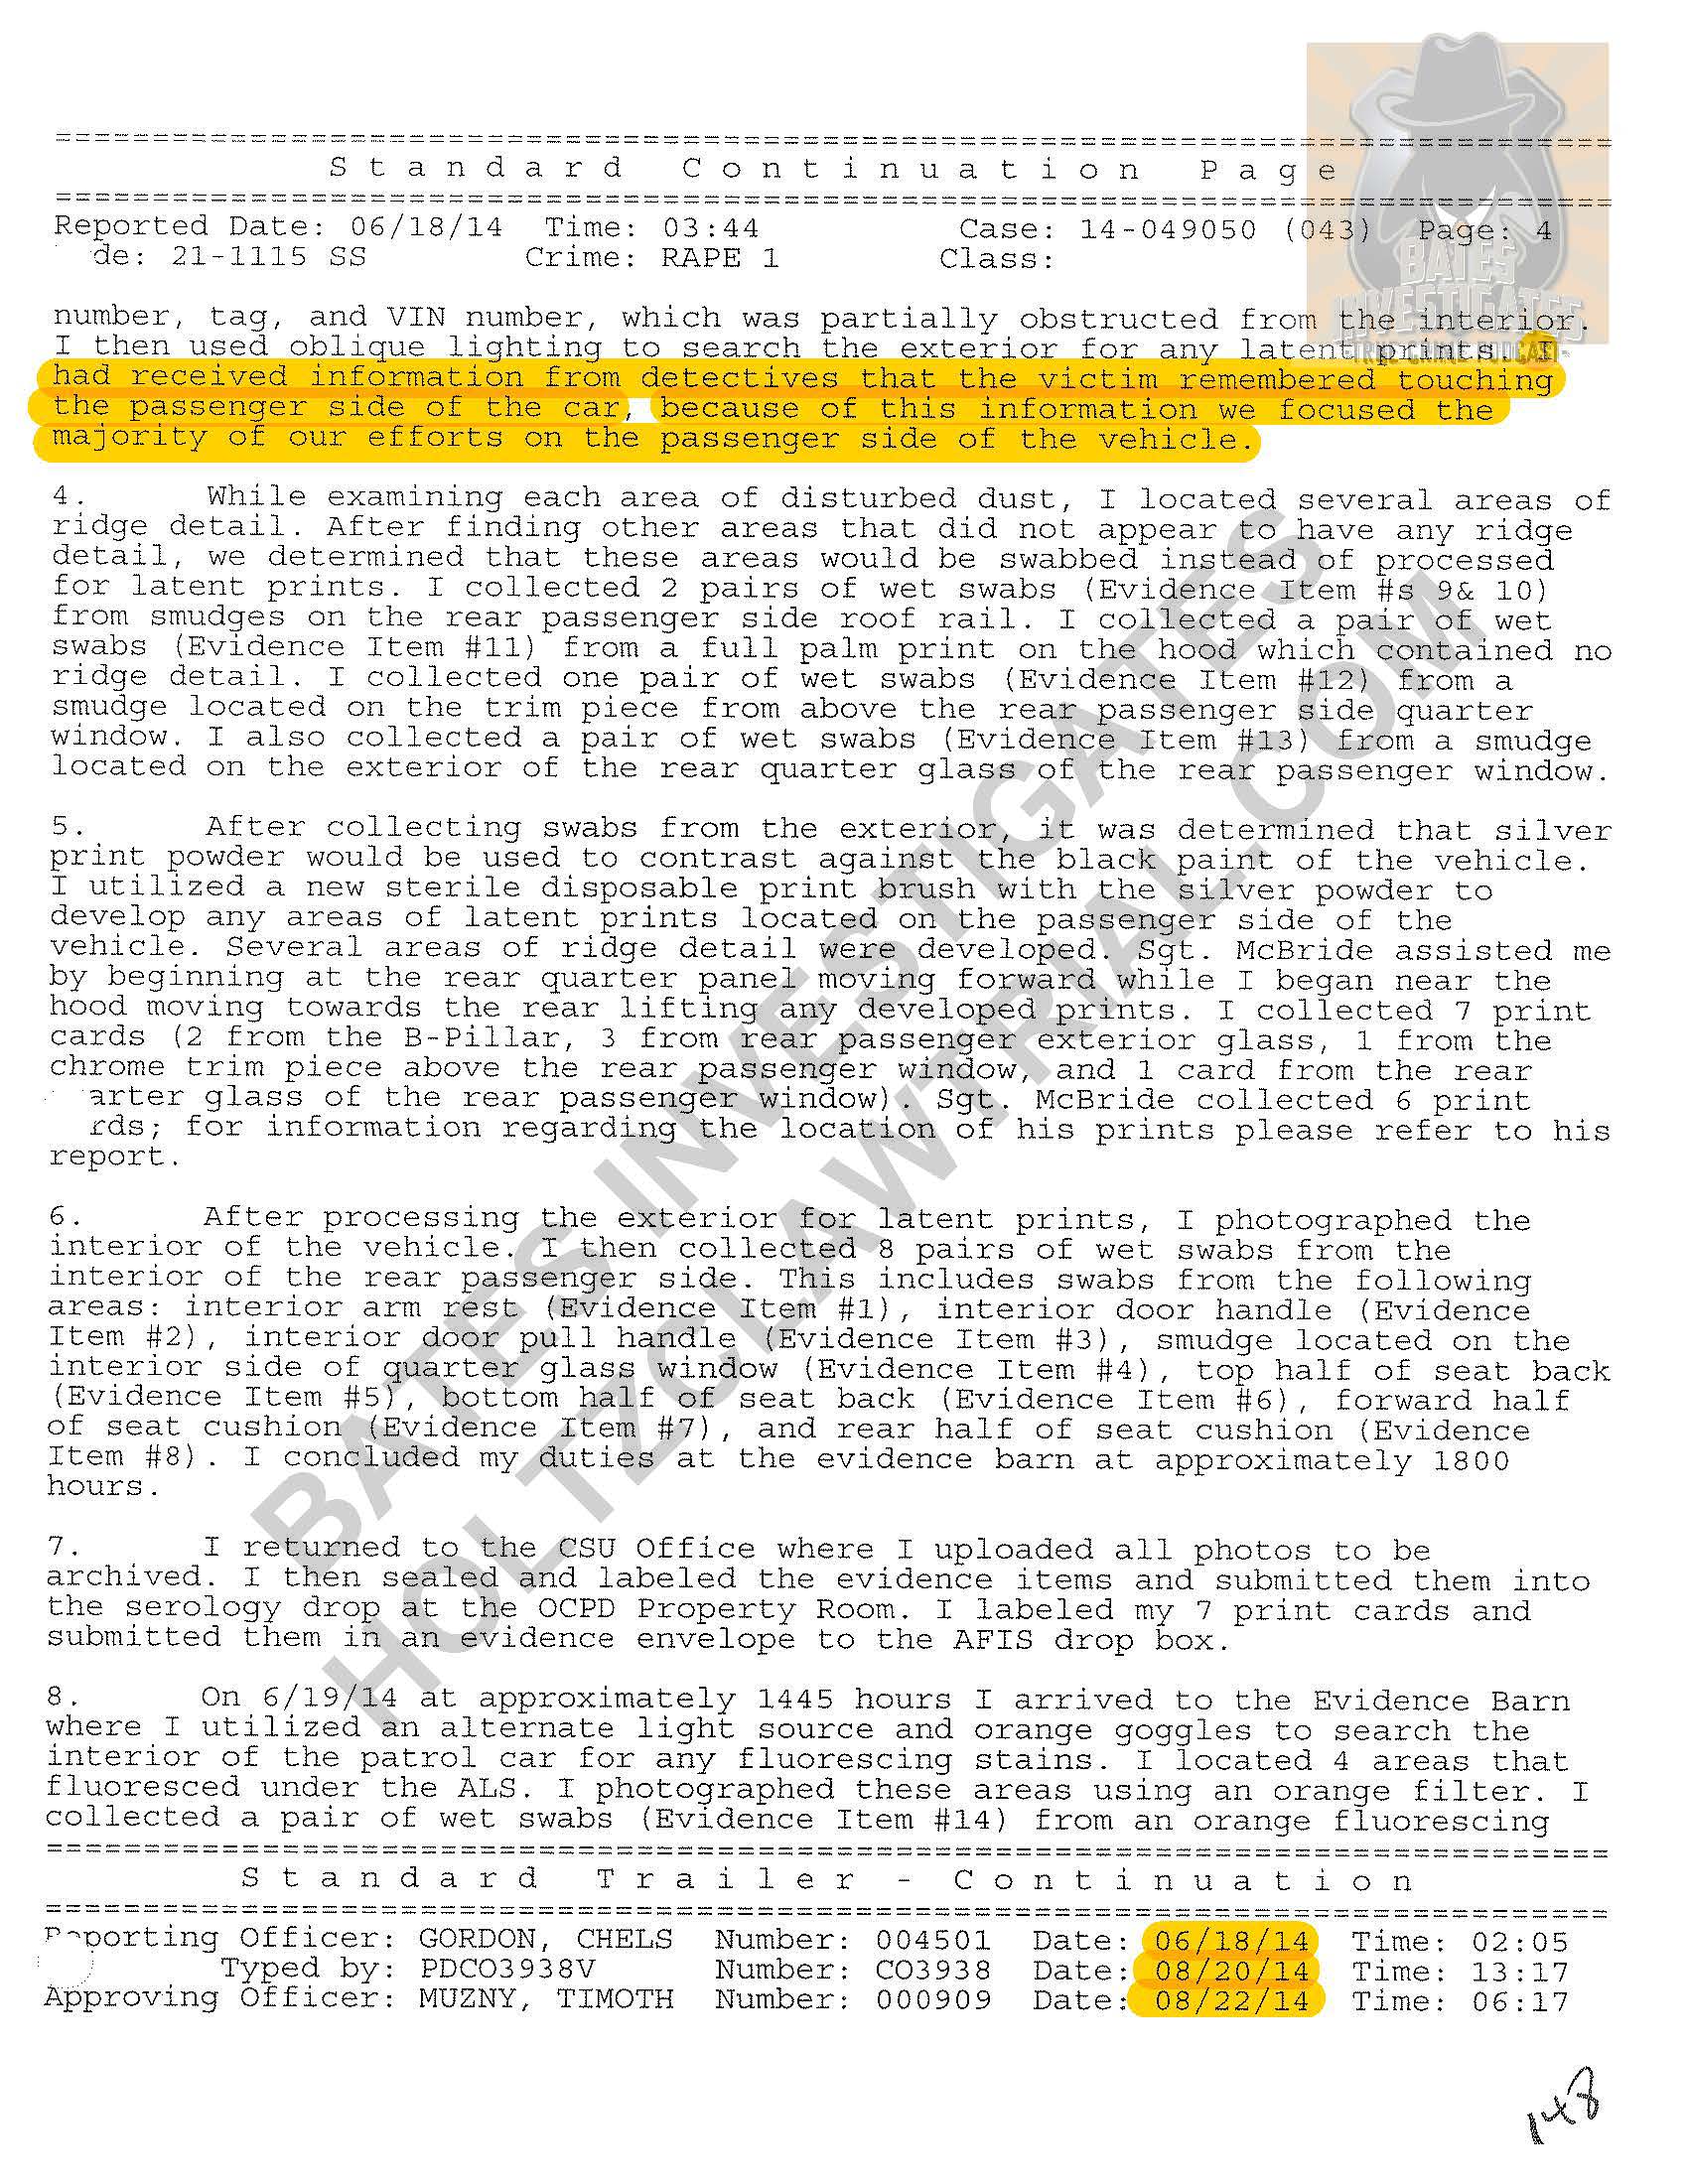 Holtzclaw - Ep02 - Police Reports Watermarked_Page_41.jpg